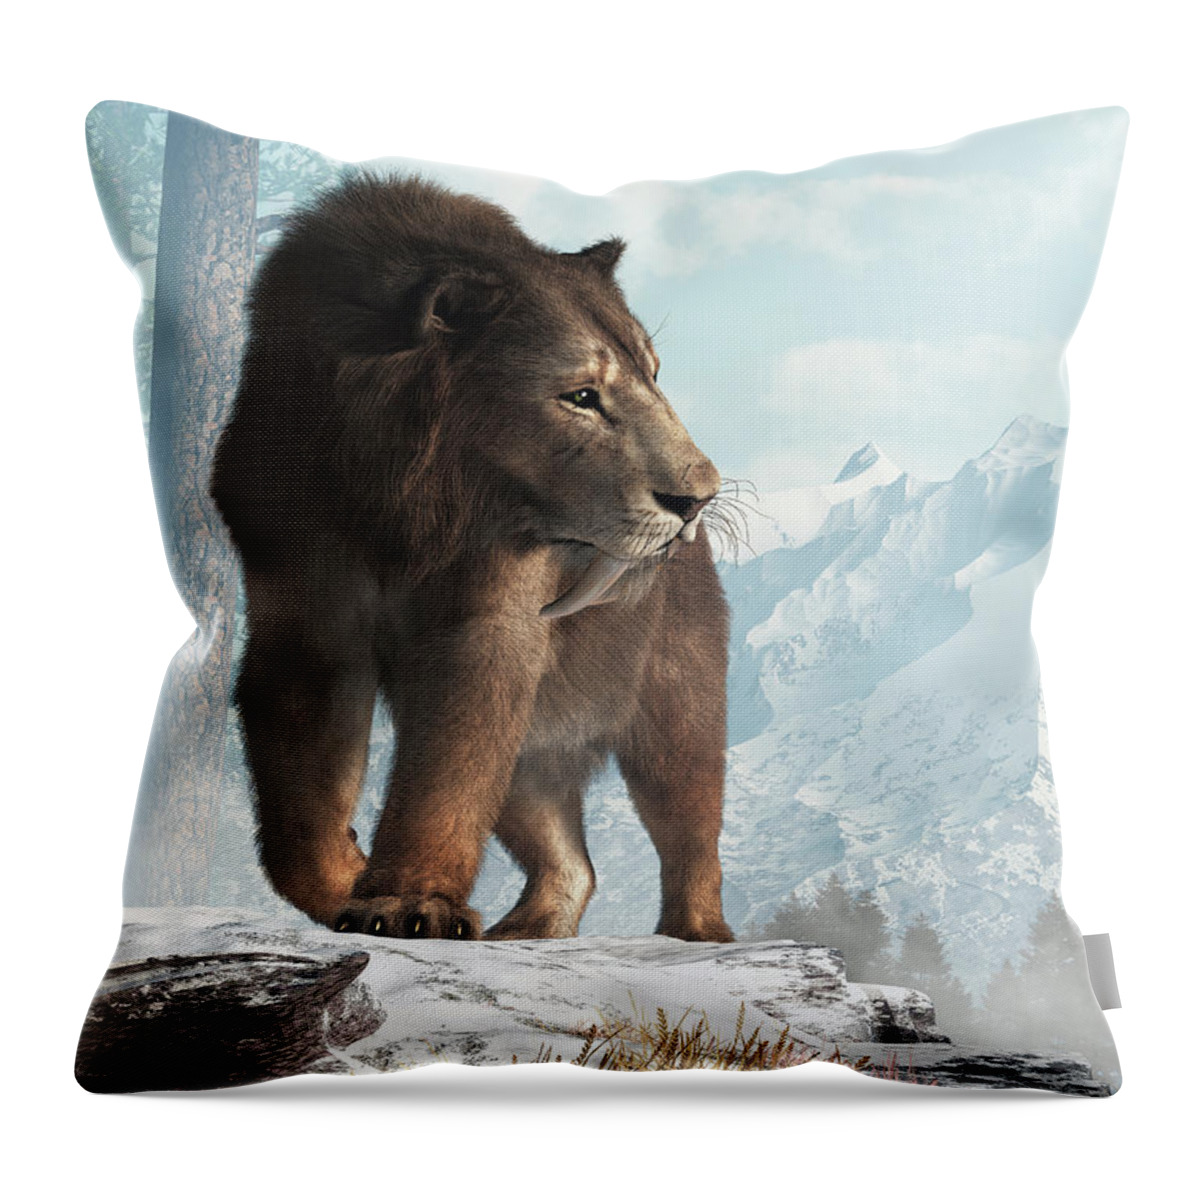 Saber-toothed Throw Pillow featuring the digital art Saber Tooth in Snow by Daniel Eskridge